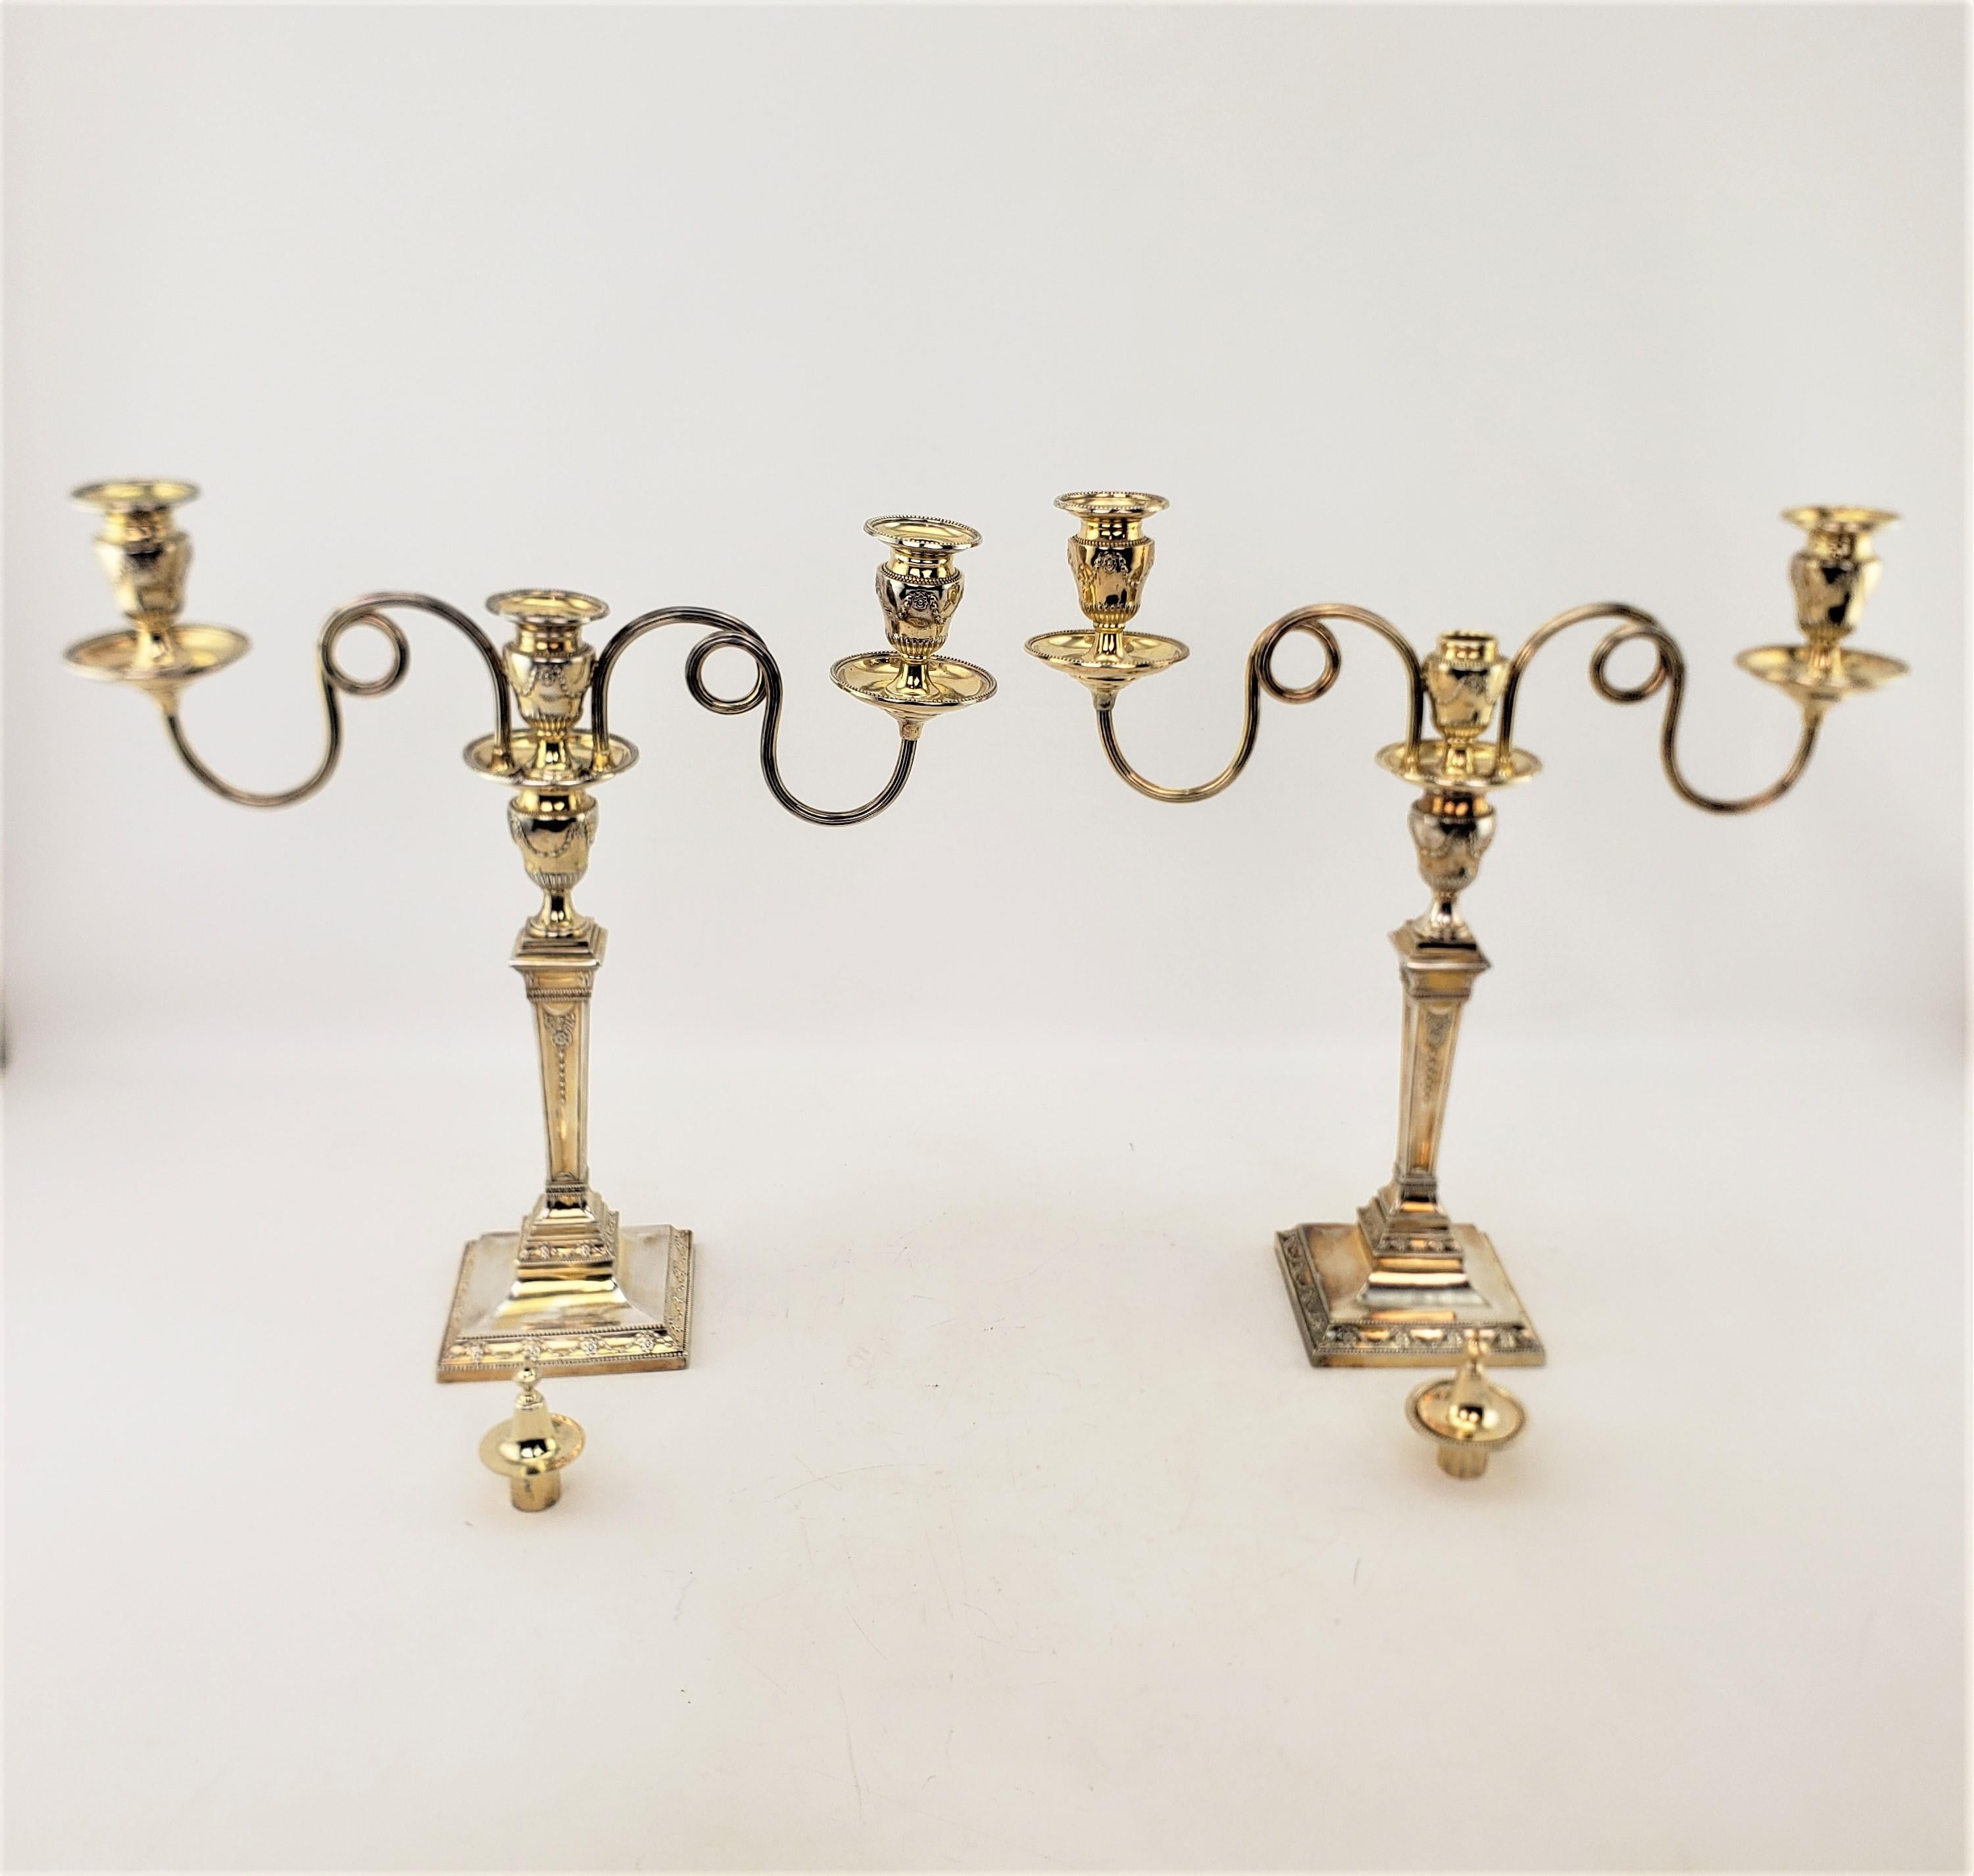 Set of Antique Mappin & Webb Silver Plated & Gilt Washed Convertible Candelabras For Sale 3